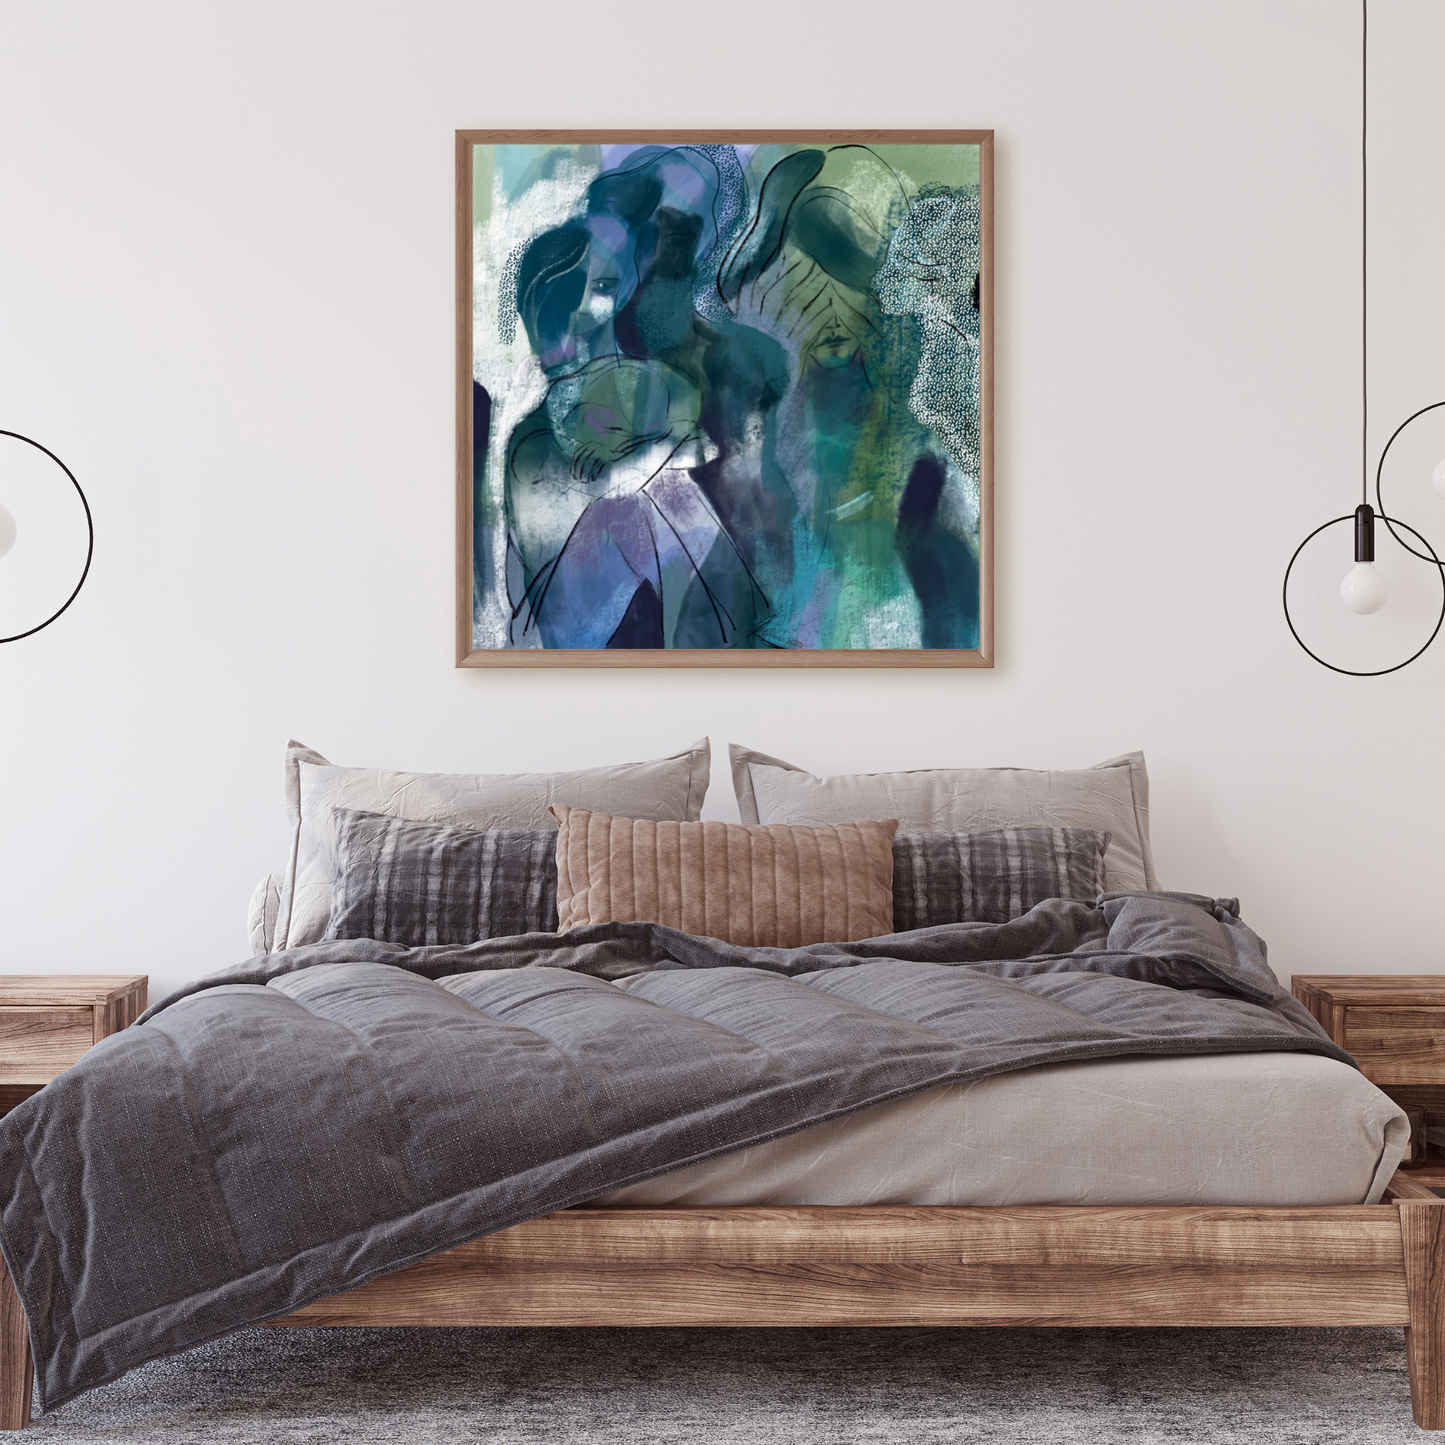 An example of the Unseen painting in a bedroom